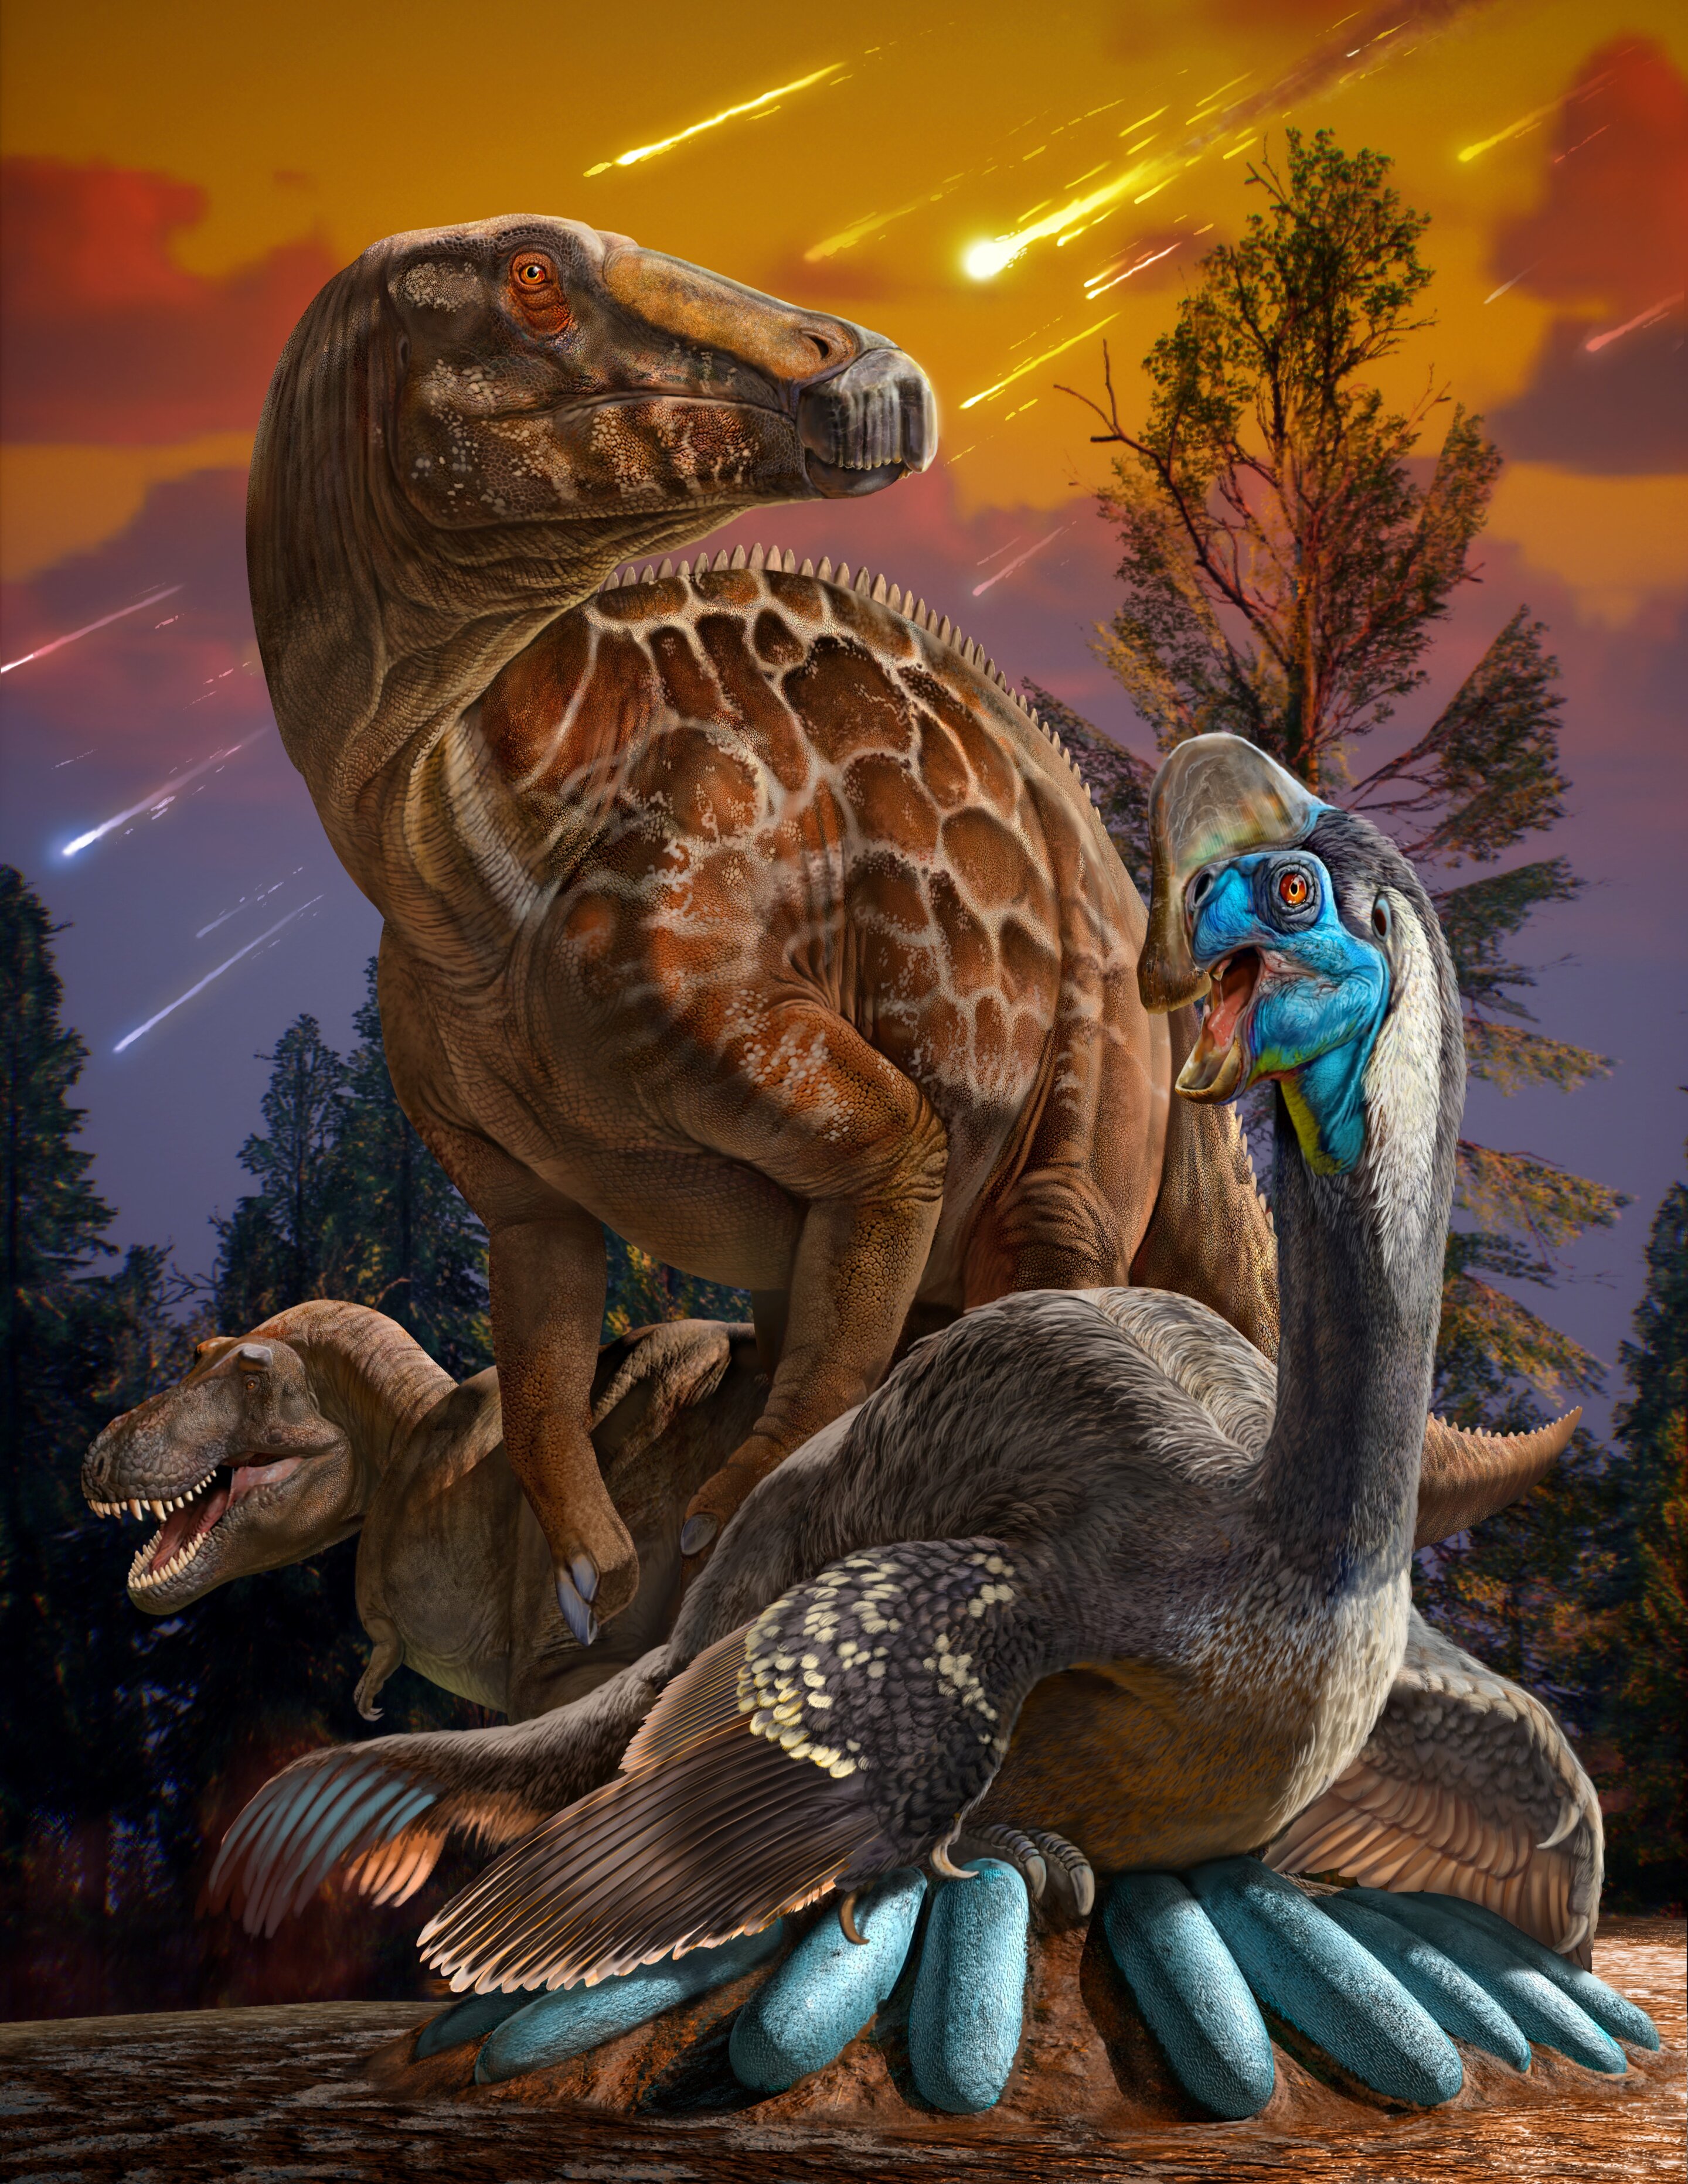 Chinese fossil eggs show dinosaur decline before extinction